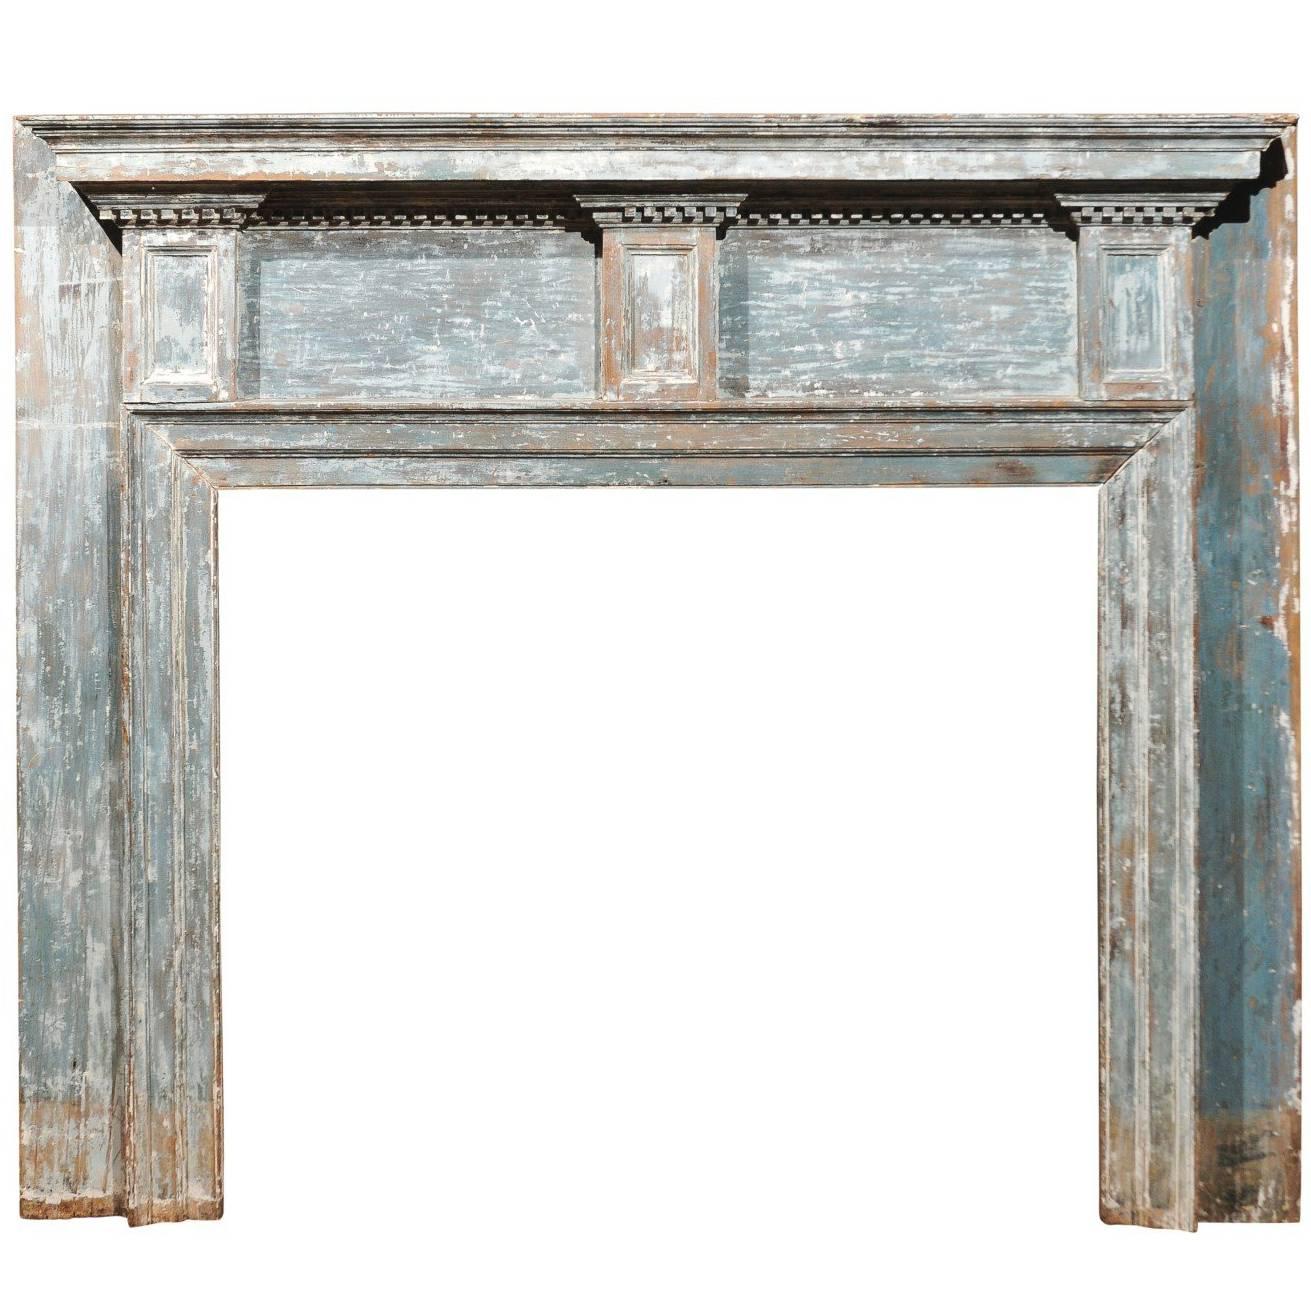 18th Century, American Federal Painted Blue Mantel